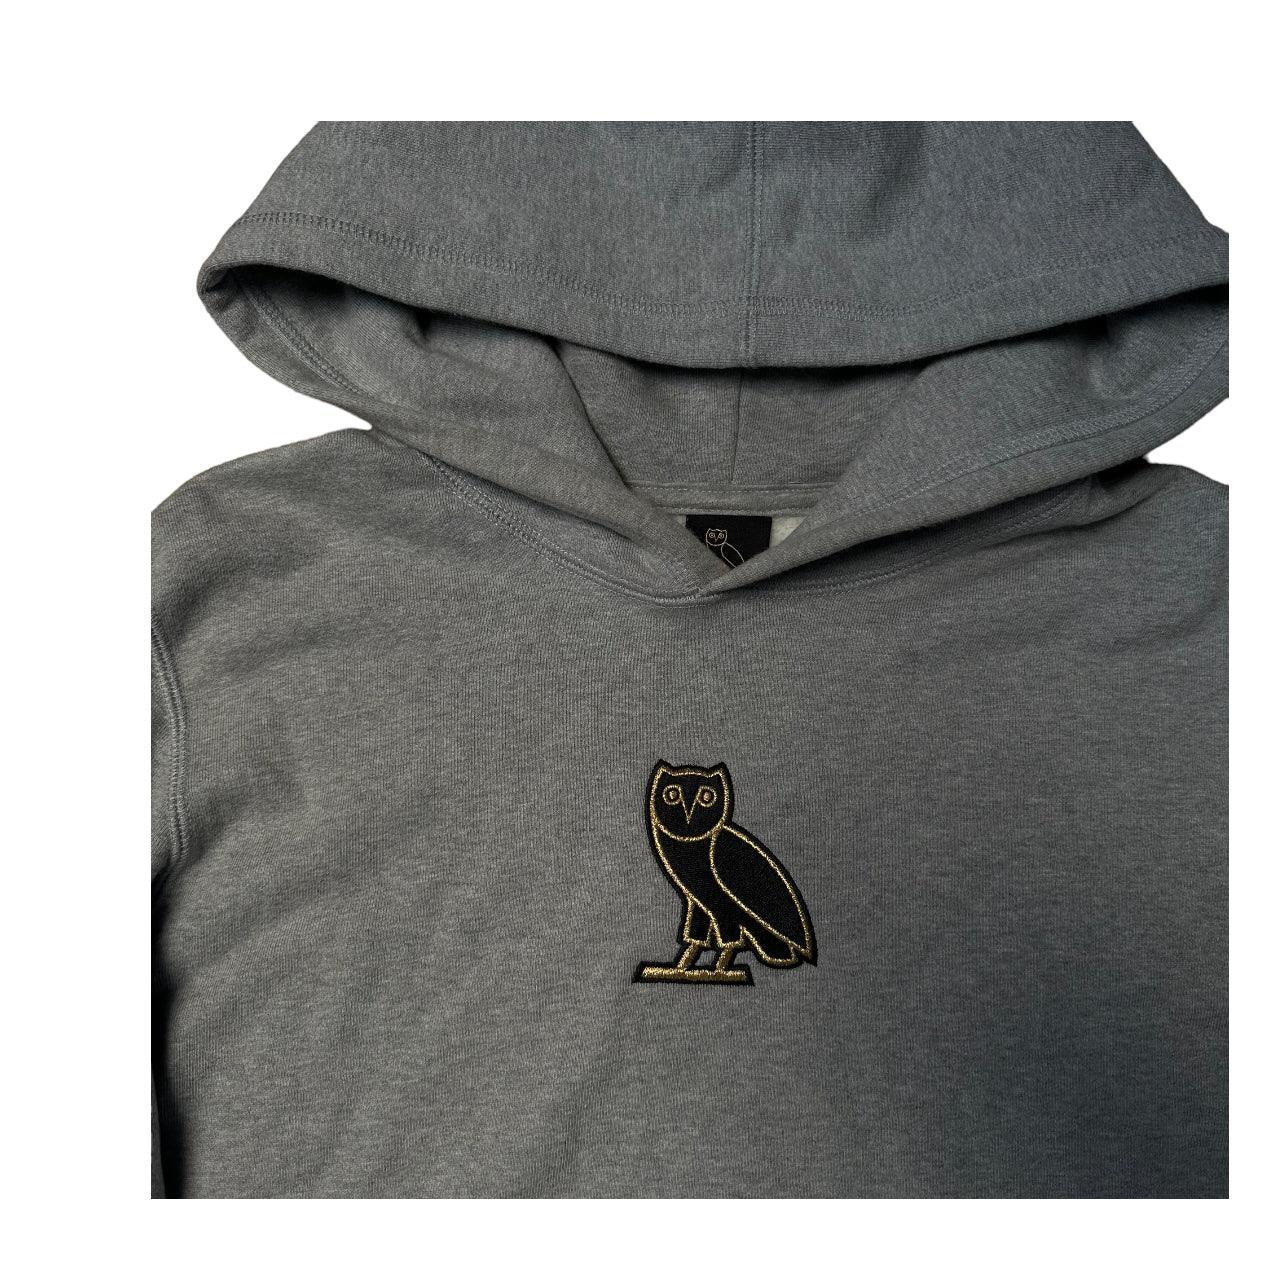 Ovo grey gold hoodie - Known Source